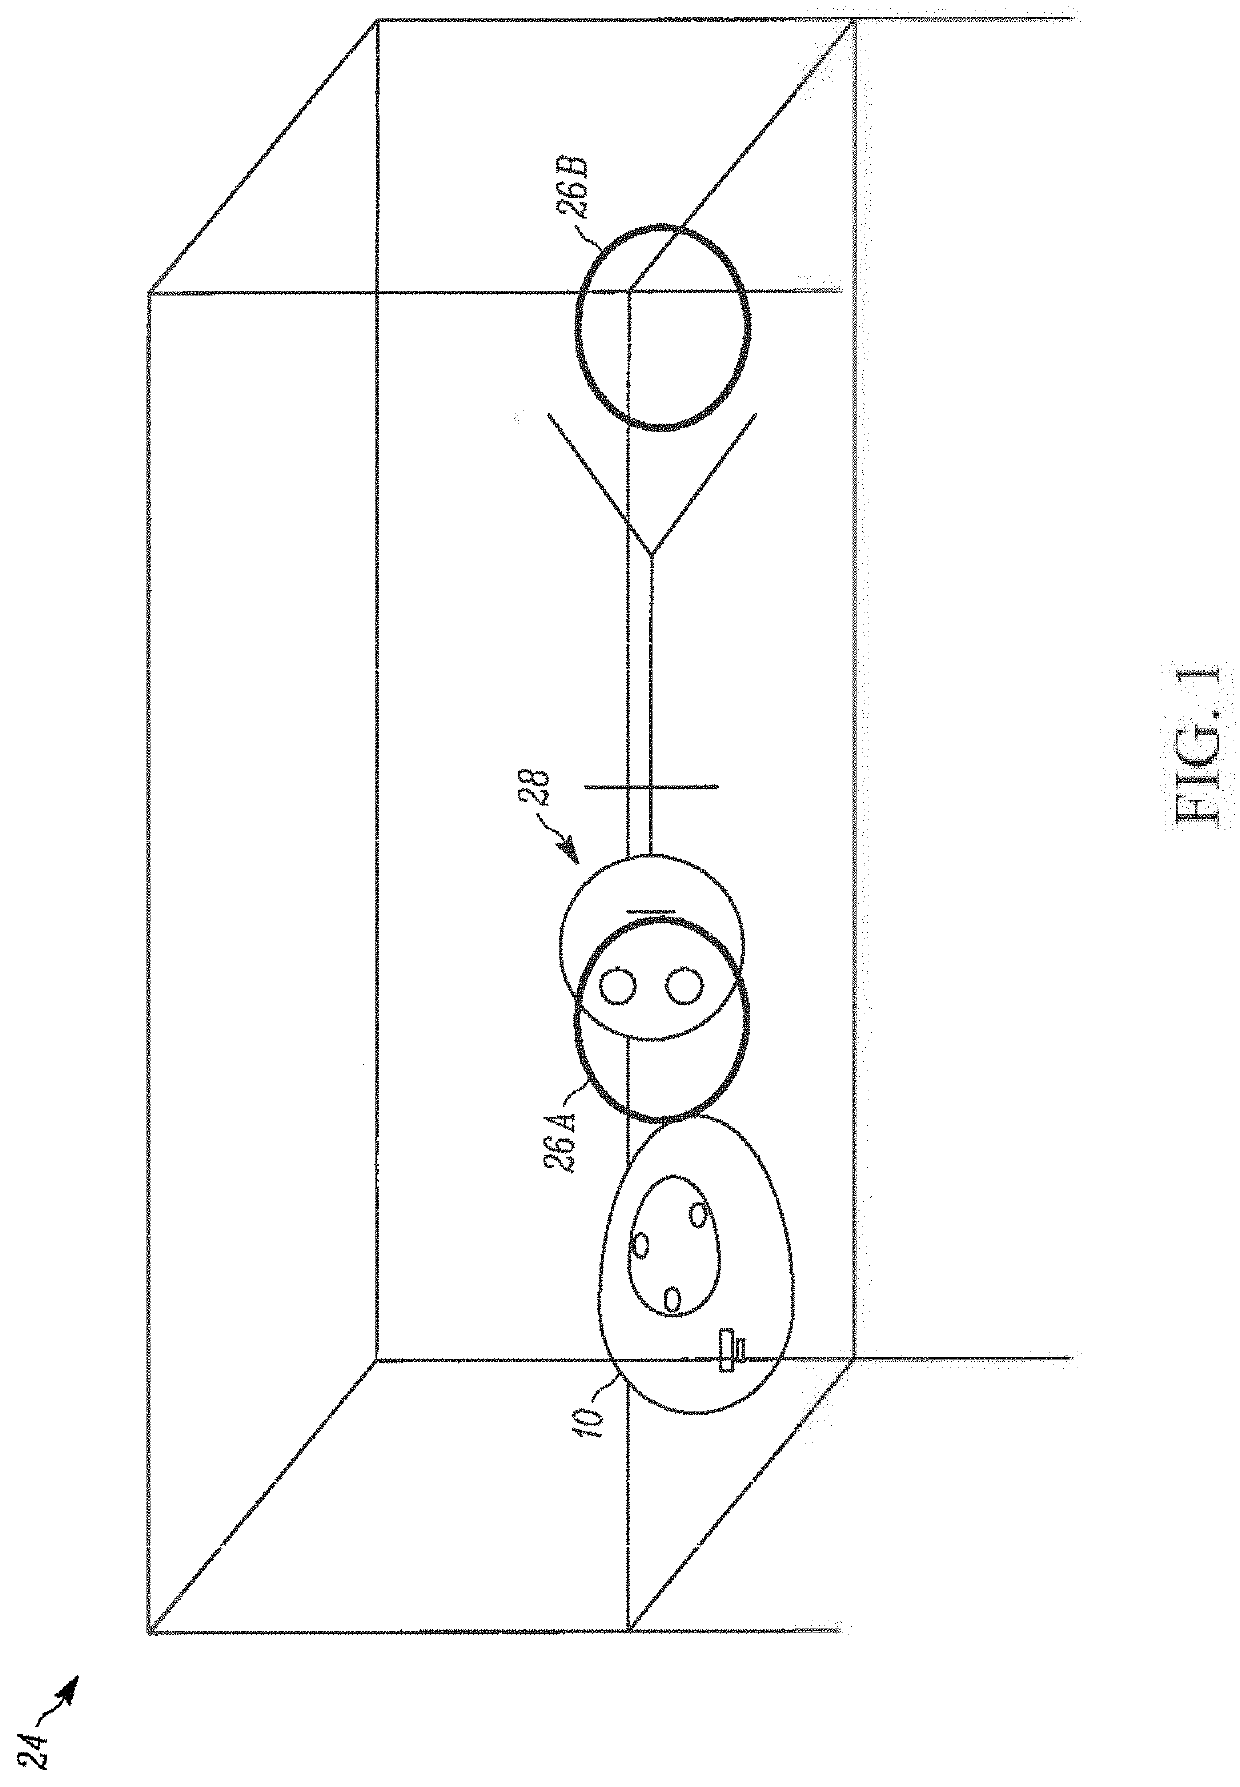 Audio device and method of use